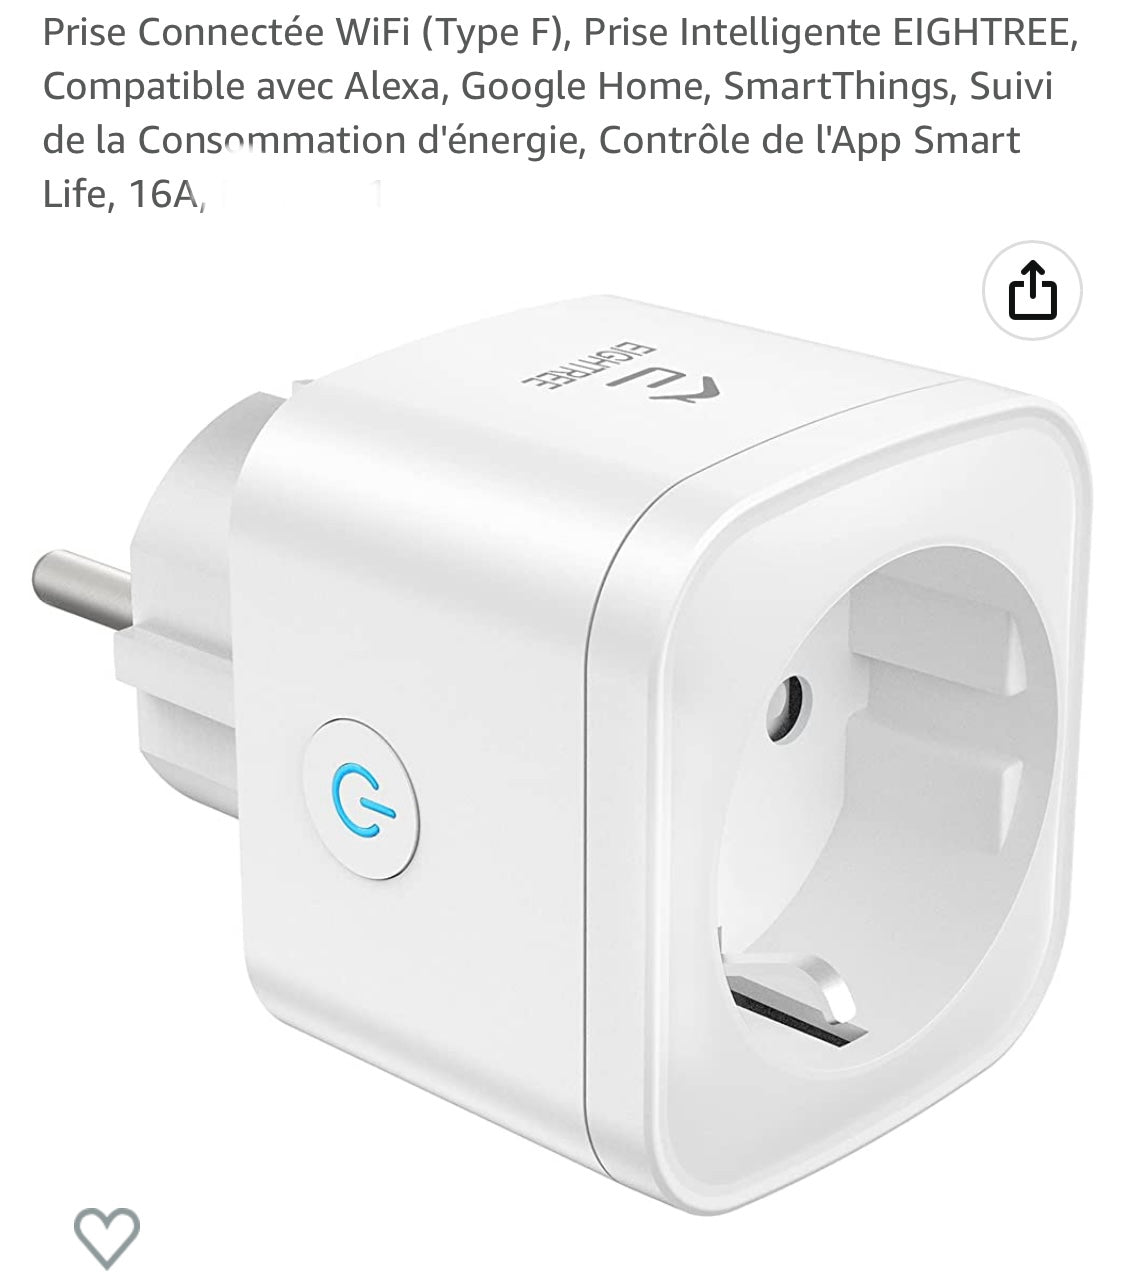 Prise connectée Eightree Wifi iOS/Androïd -5.000F